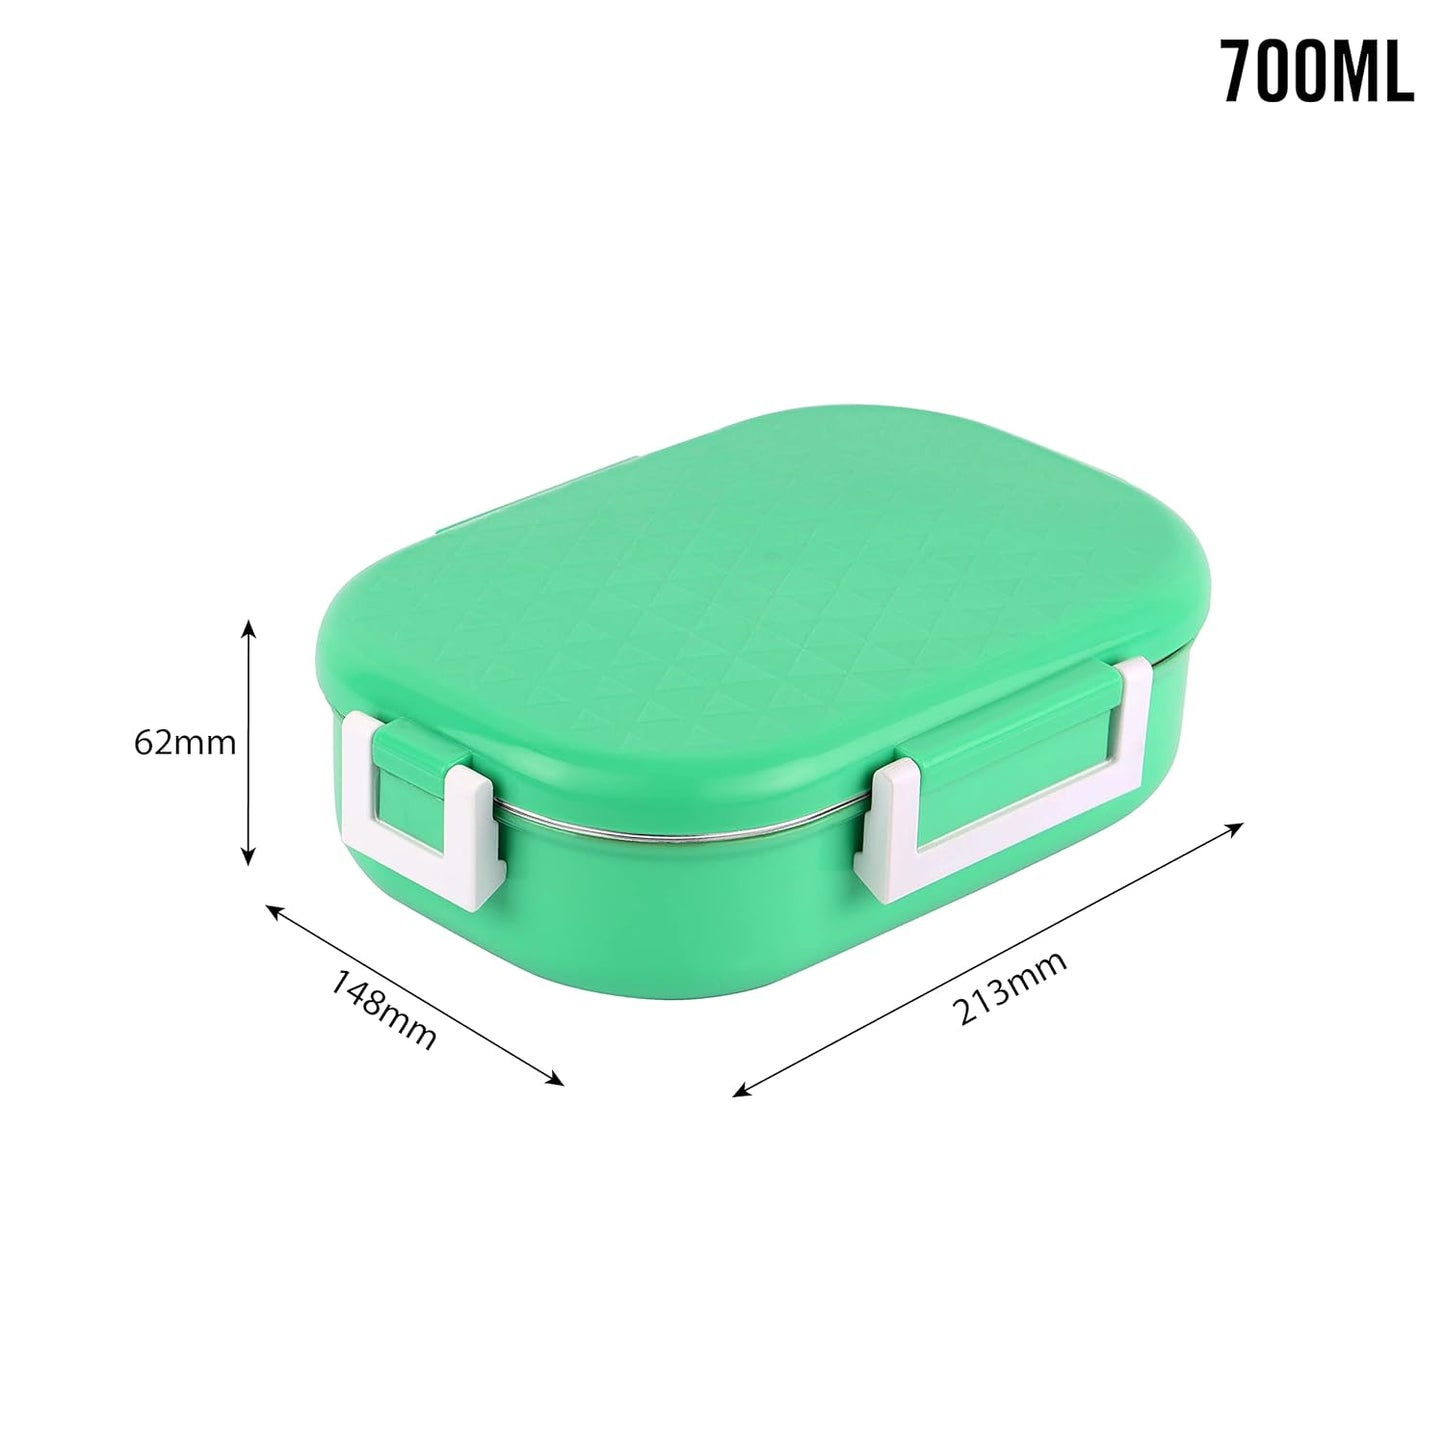 CELLO Altro Neo Lunch Box 700ml lunch box for kids and adult Green